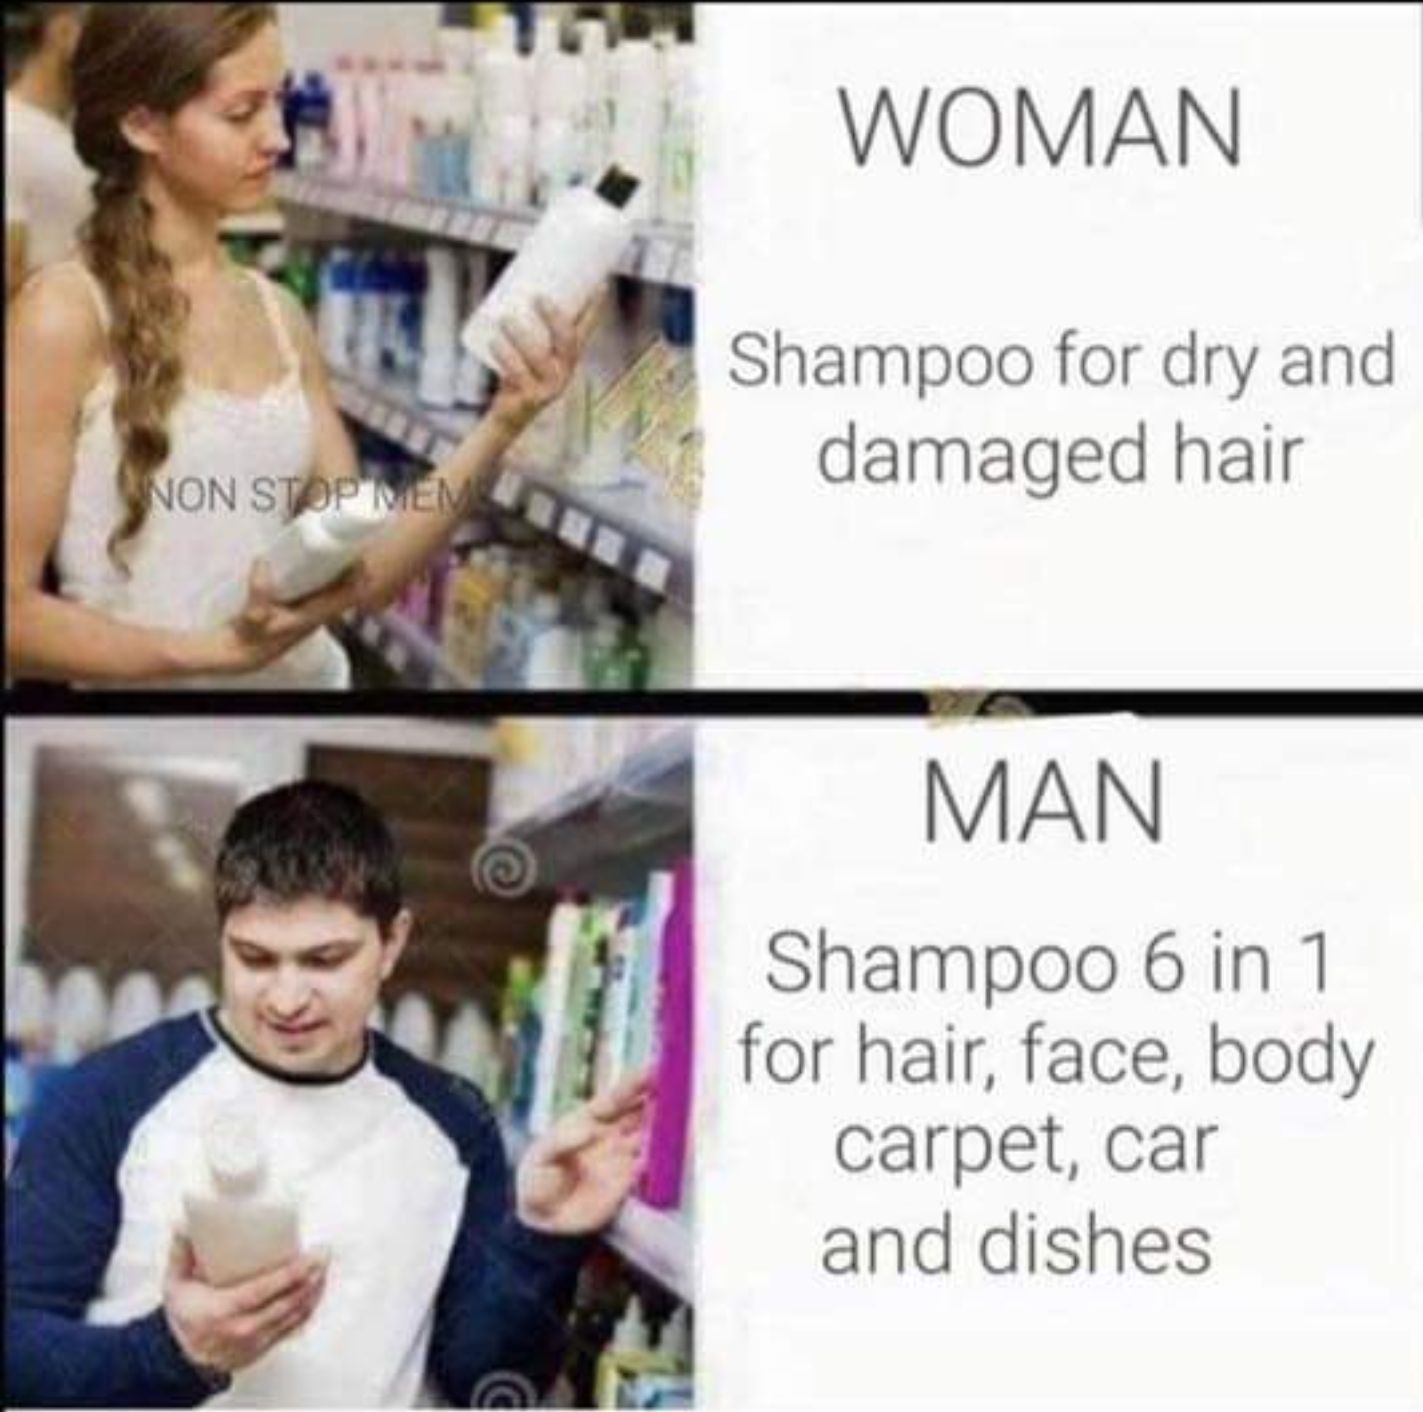 Shampoo is very useful for men.